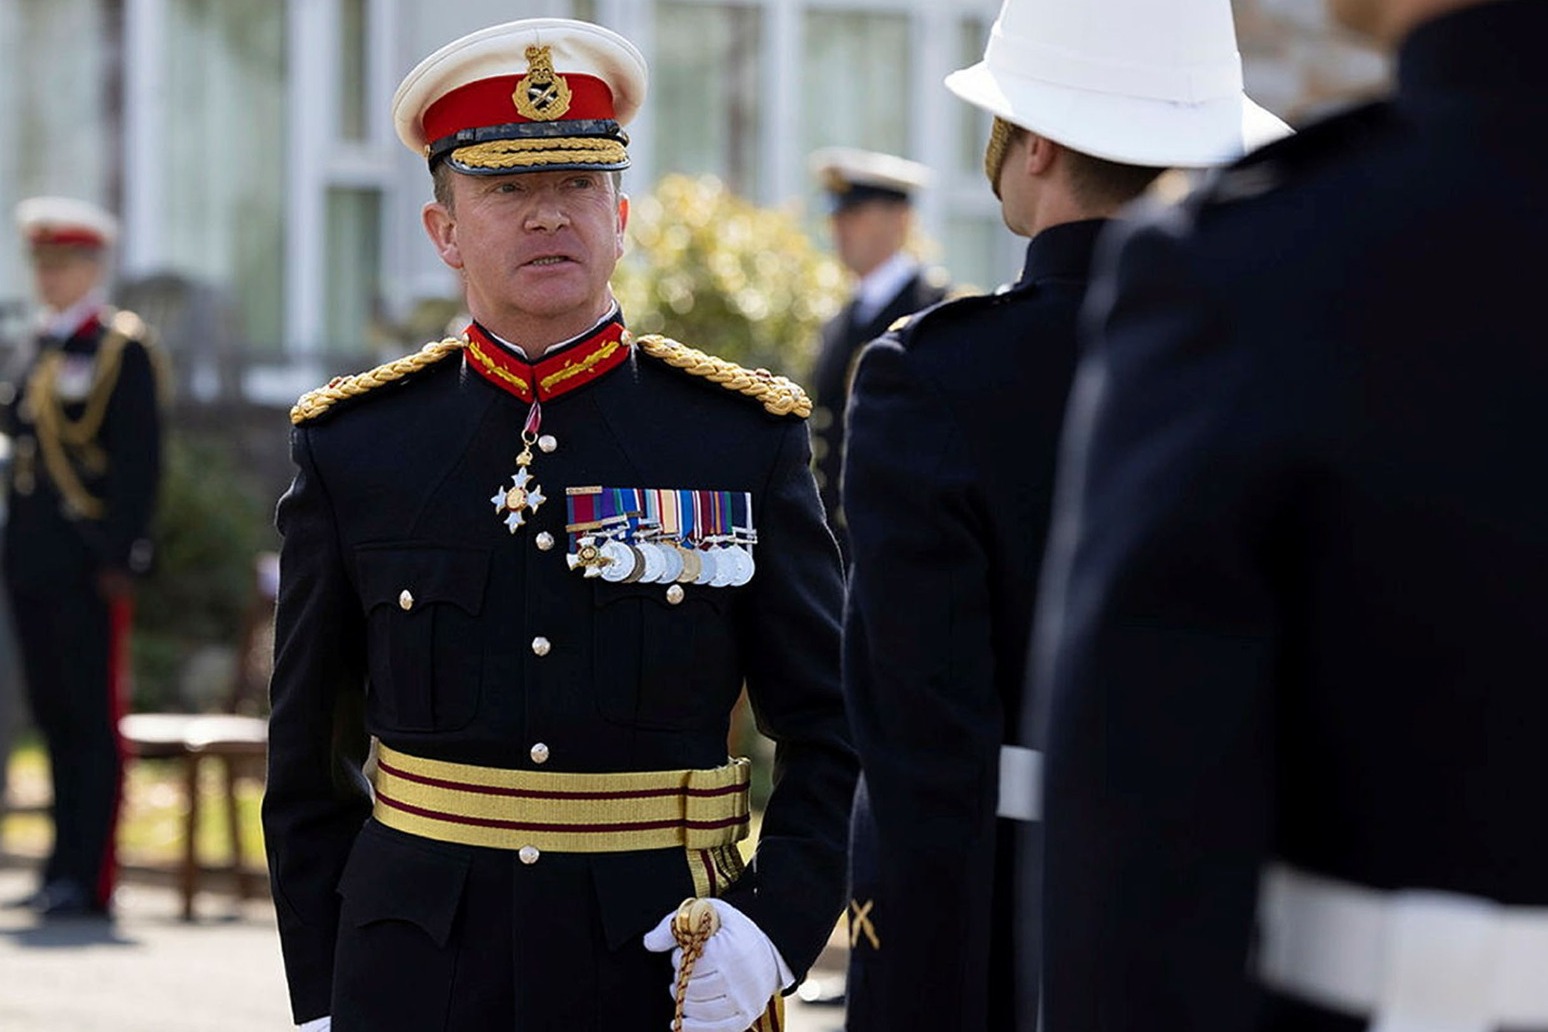 Ex-head of Royal Marines ‘died by suicide after experiencing substantial stress’ 